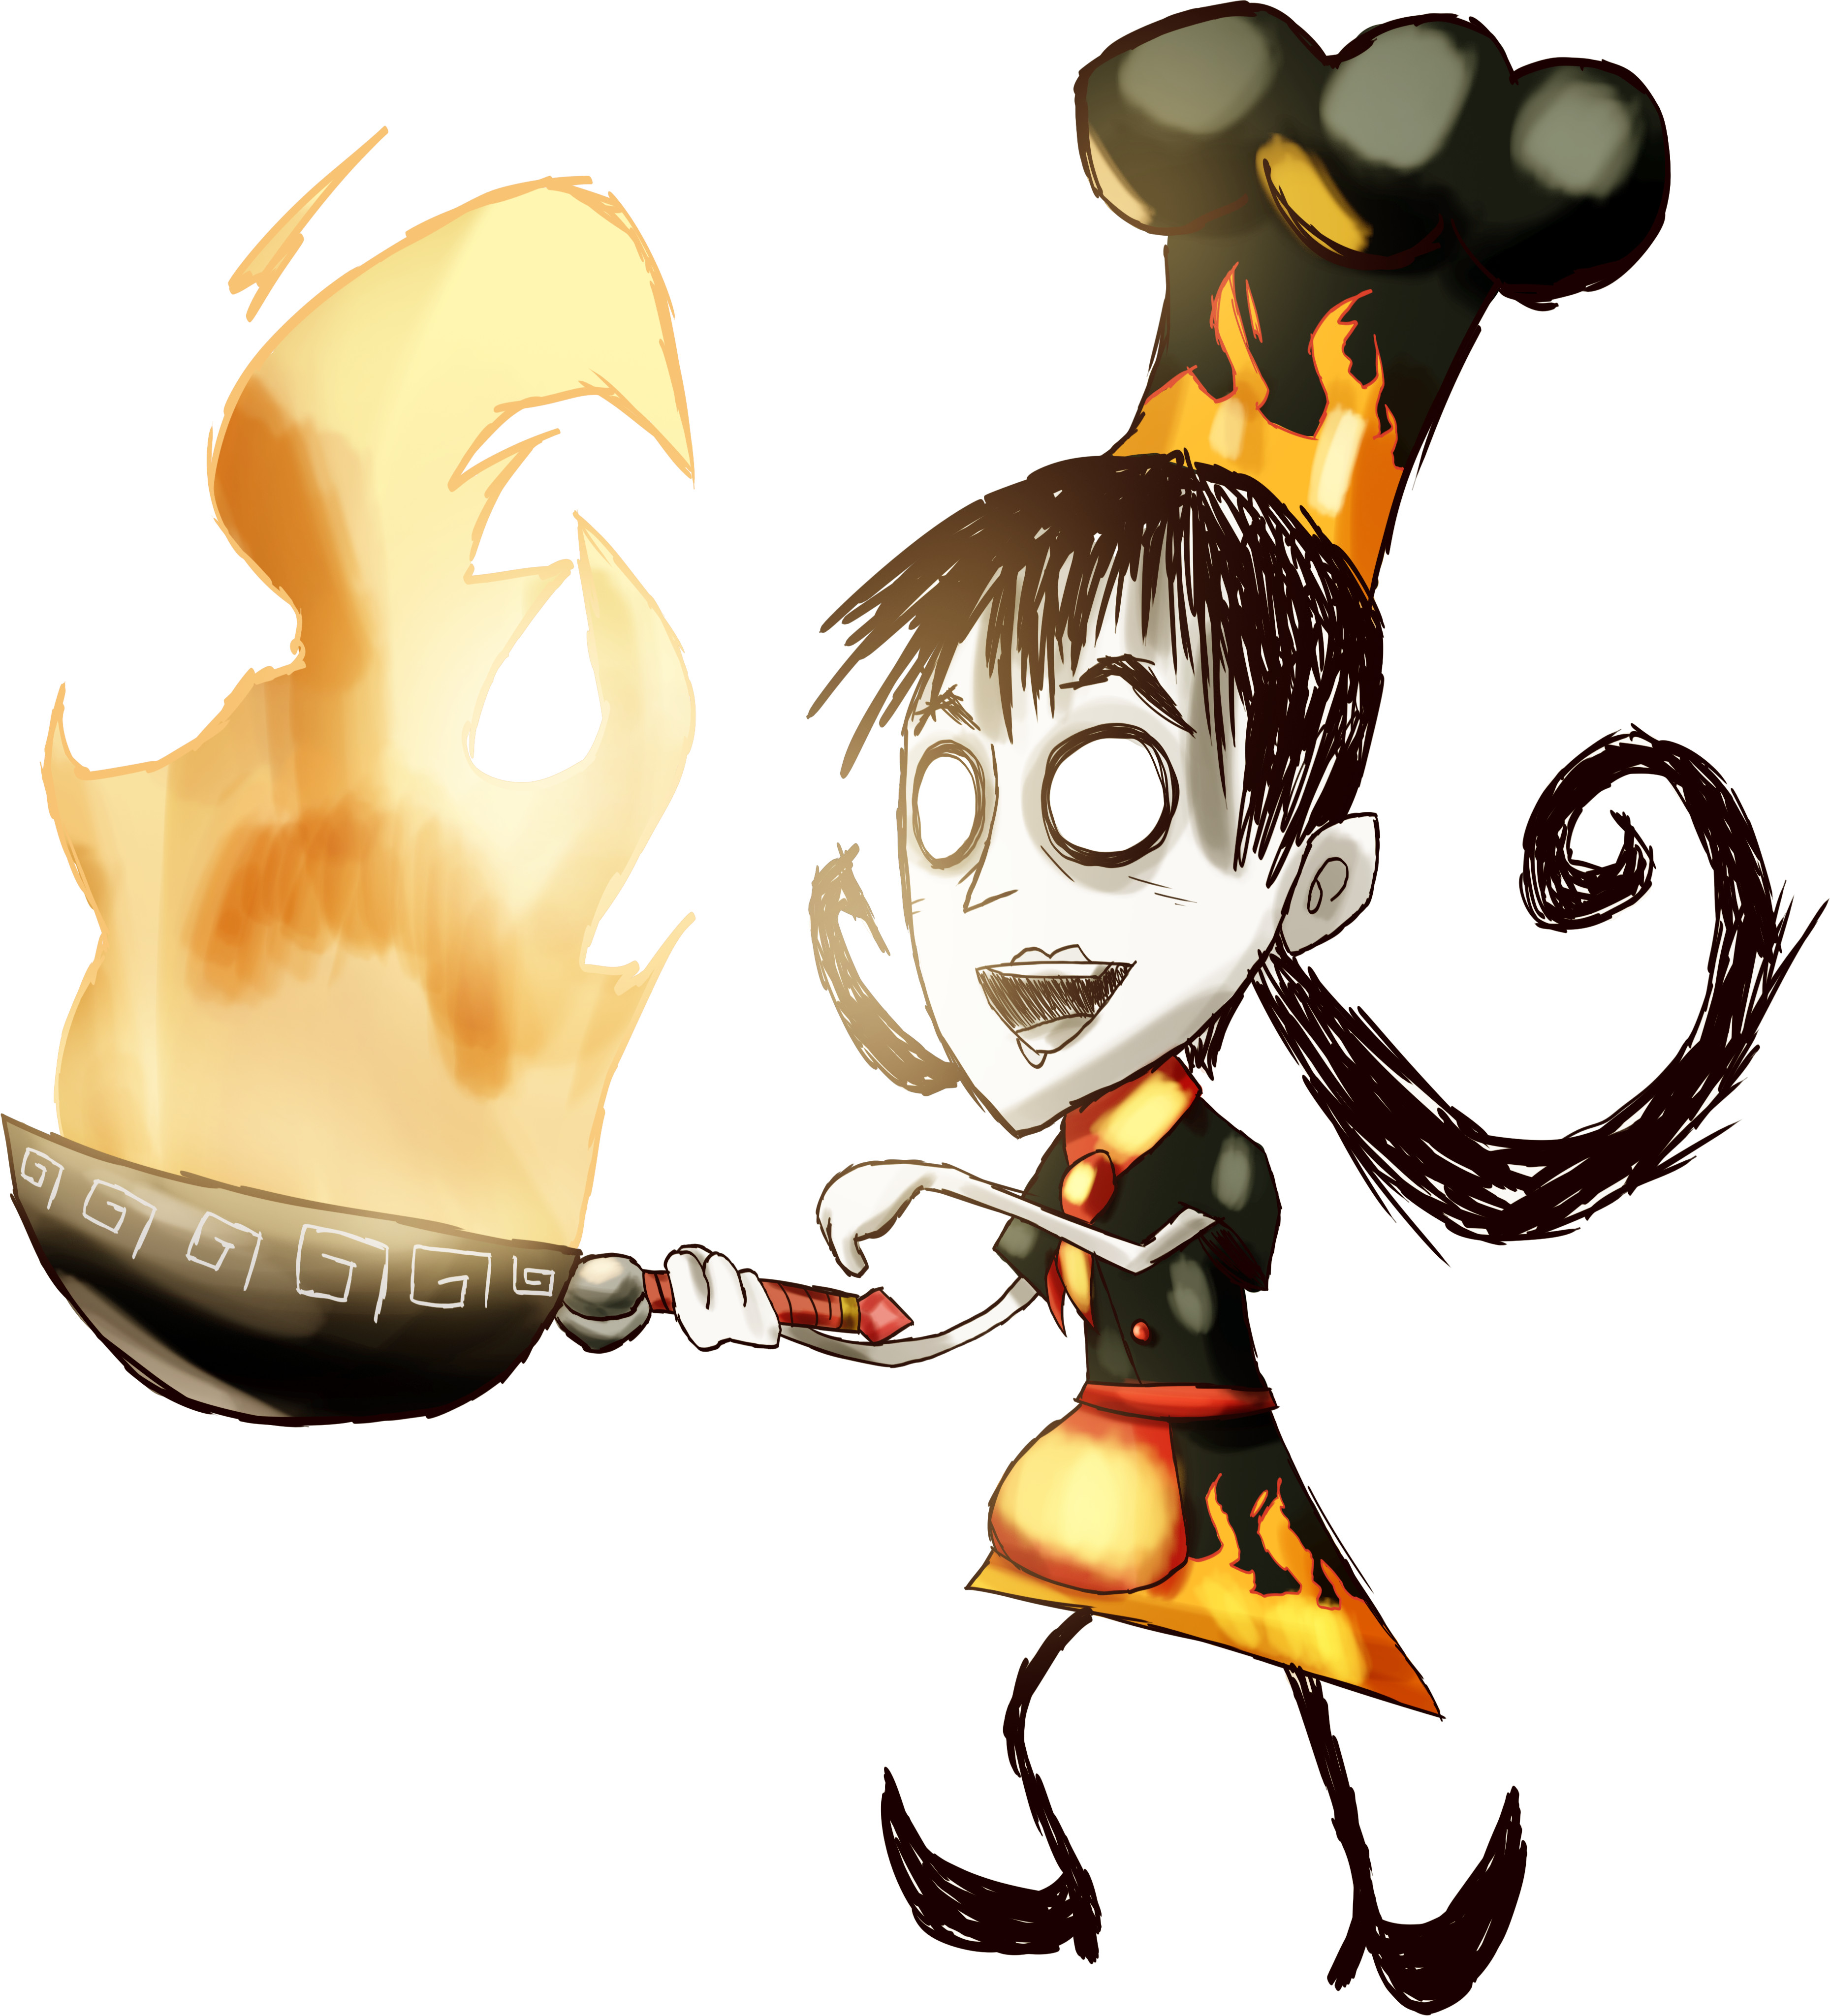 Willow from Don't Starve as the Chef. Things are so much prettier when they burn!